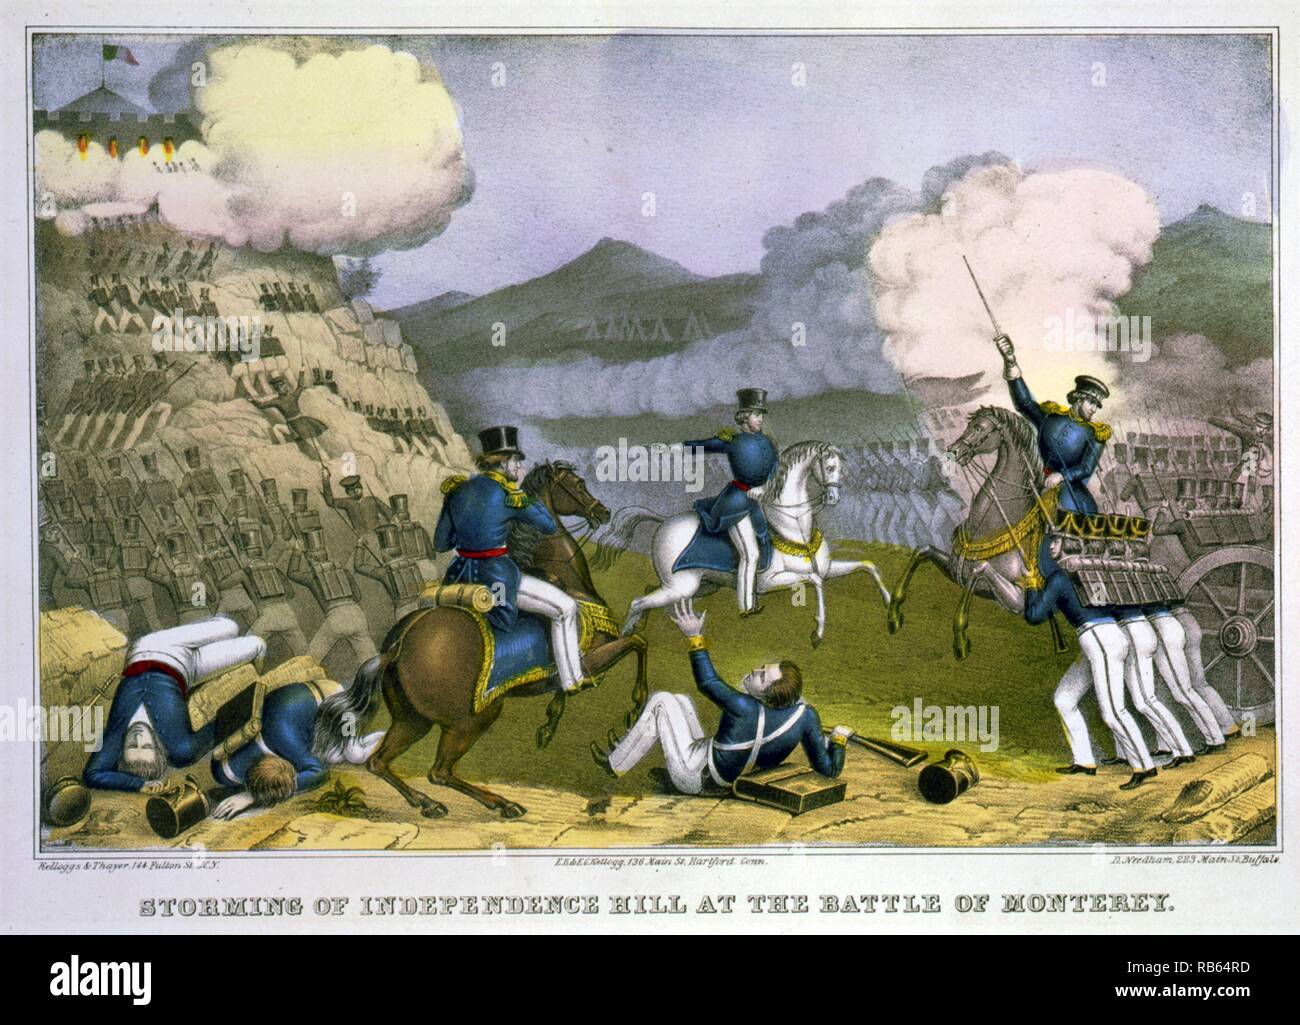 Storming of Independence Hill at the Battle of Monterey. Published: [between 1850 and 1900]. The Battle of Monterey, at Monterey, California, was waged on July 7, 1846, during the Mexican-American War. The United States captured the town unopposed. Stock Photo